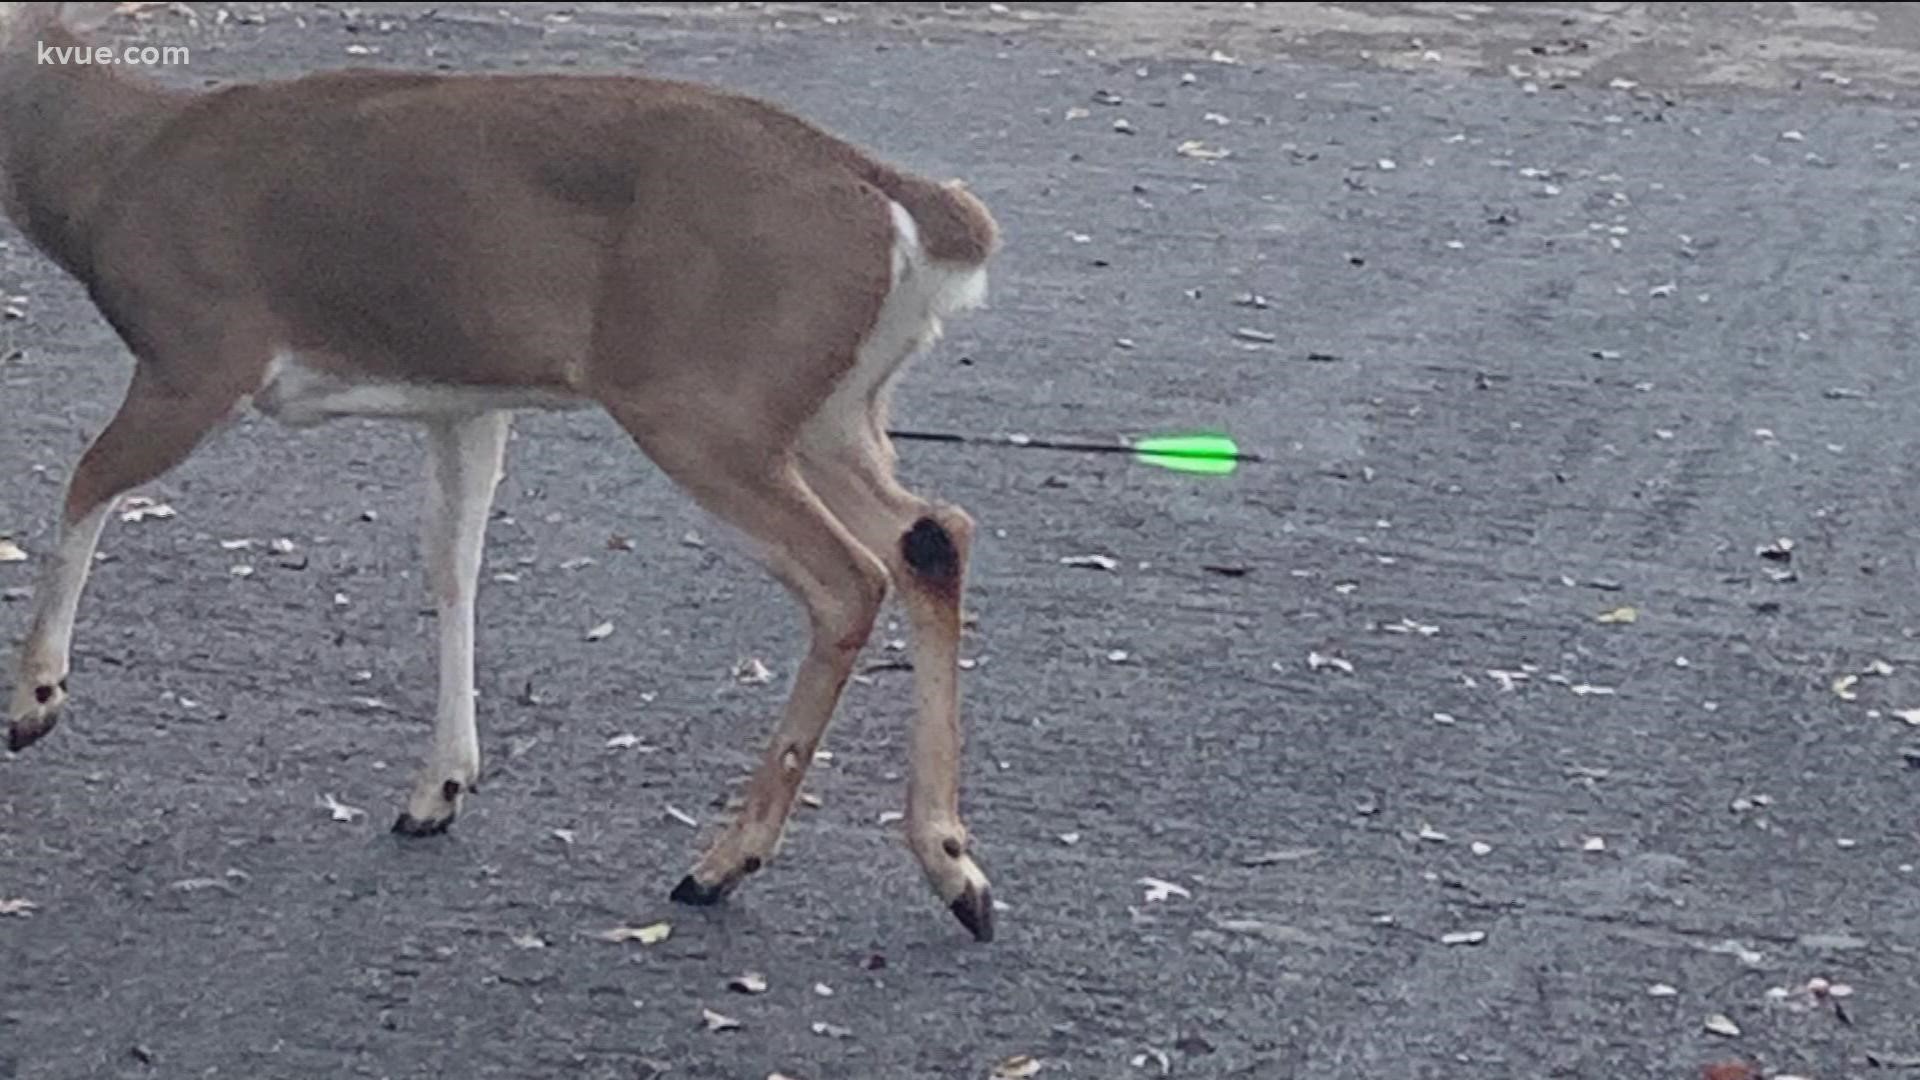 Texas game wardens are investigating an unsettling sight in northwest Austin. A photo showed a buck with an arrow stuck in its leg on the greenbelt.